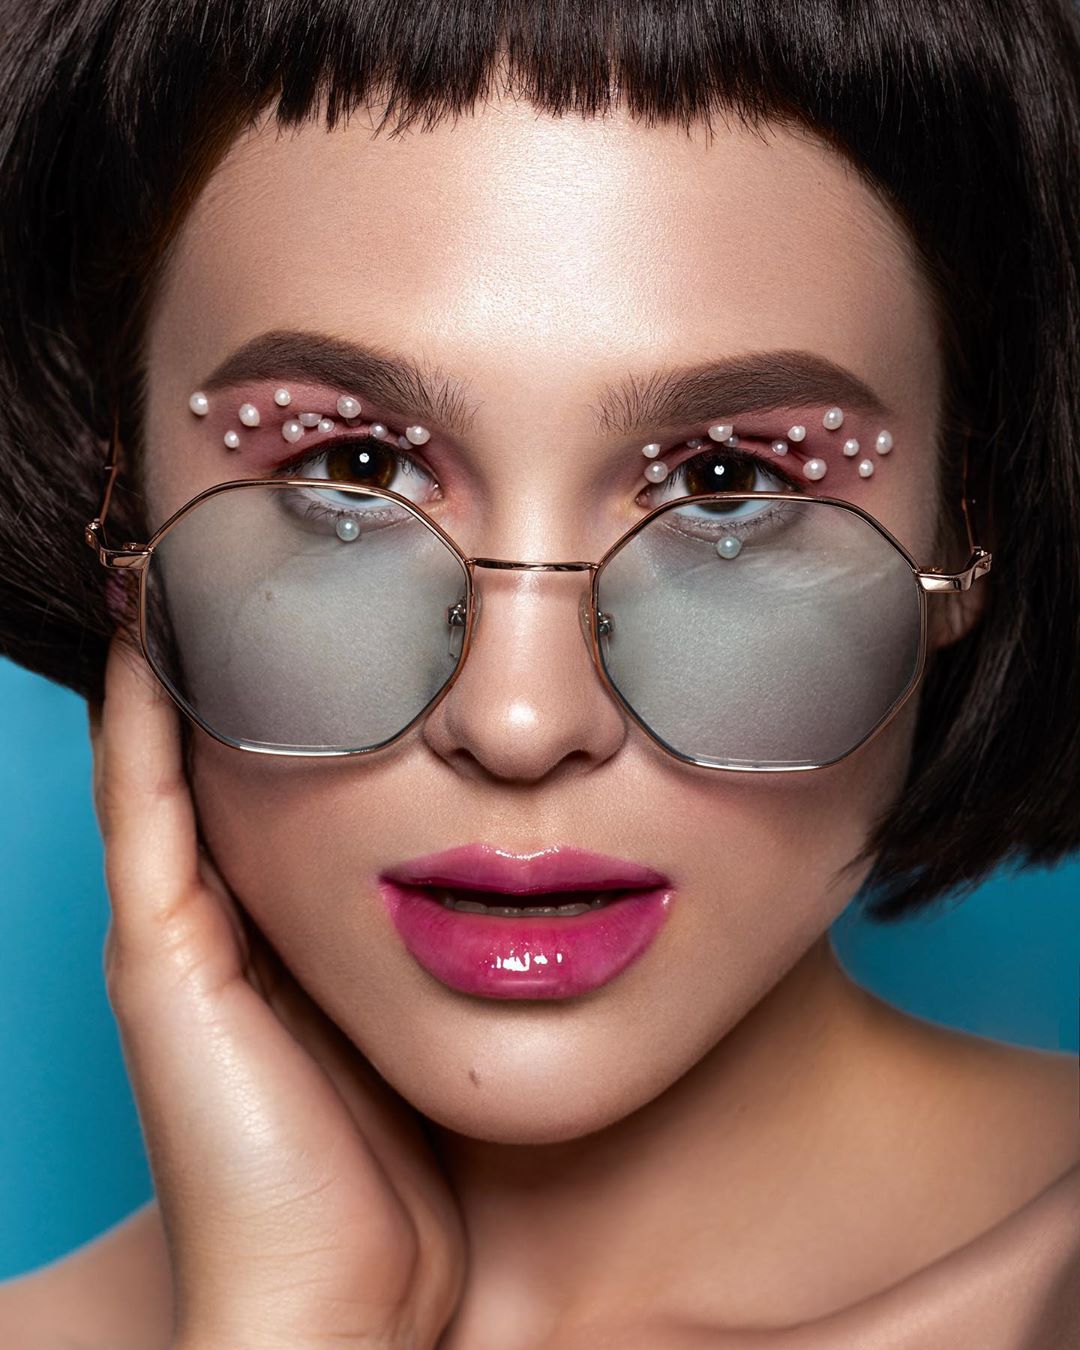 Lady With Creative Make Up In Sunglasses And Pearl Beads